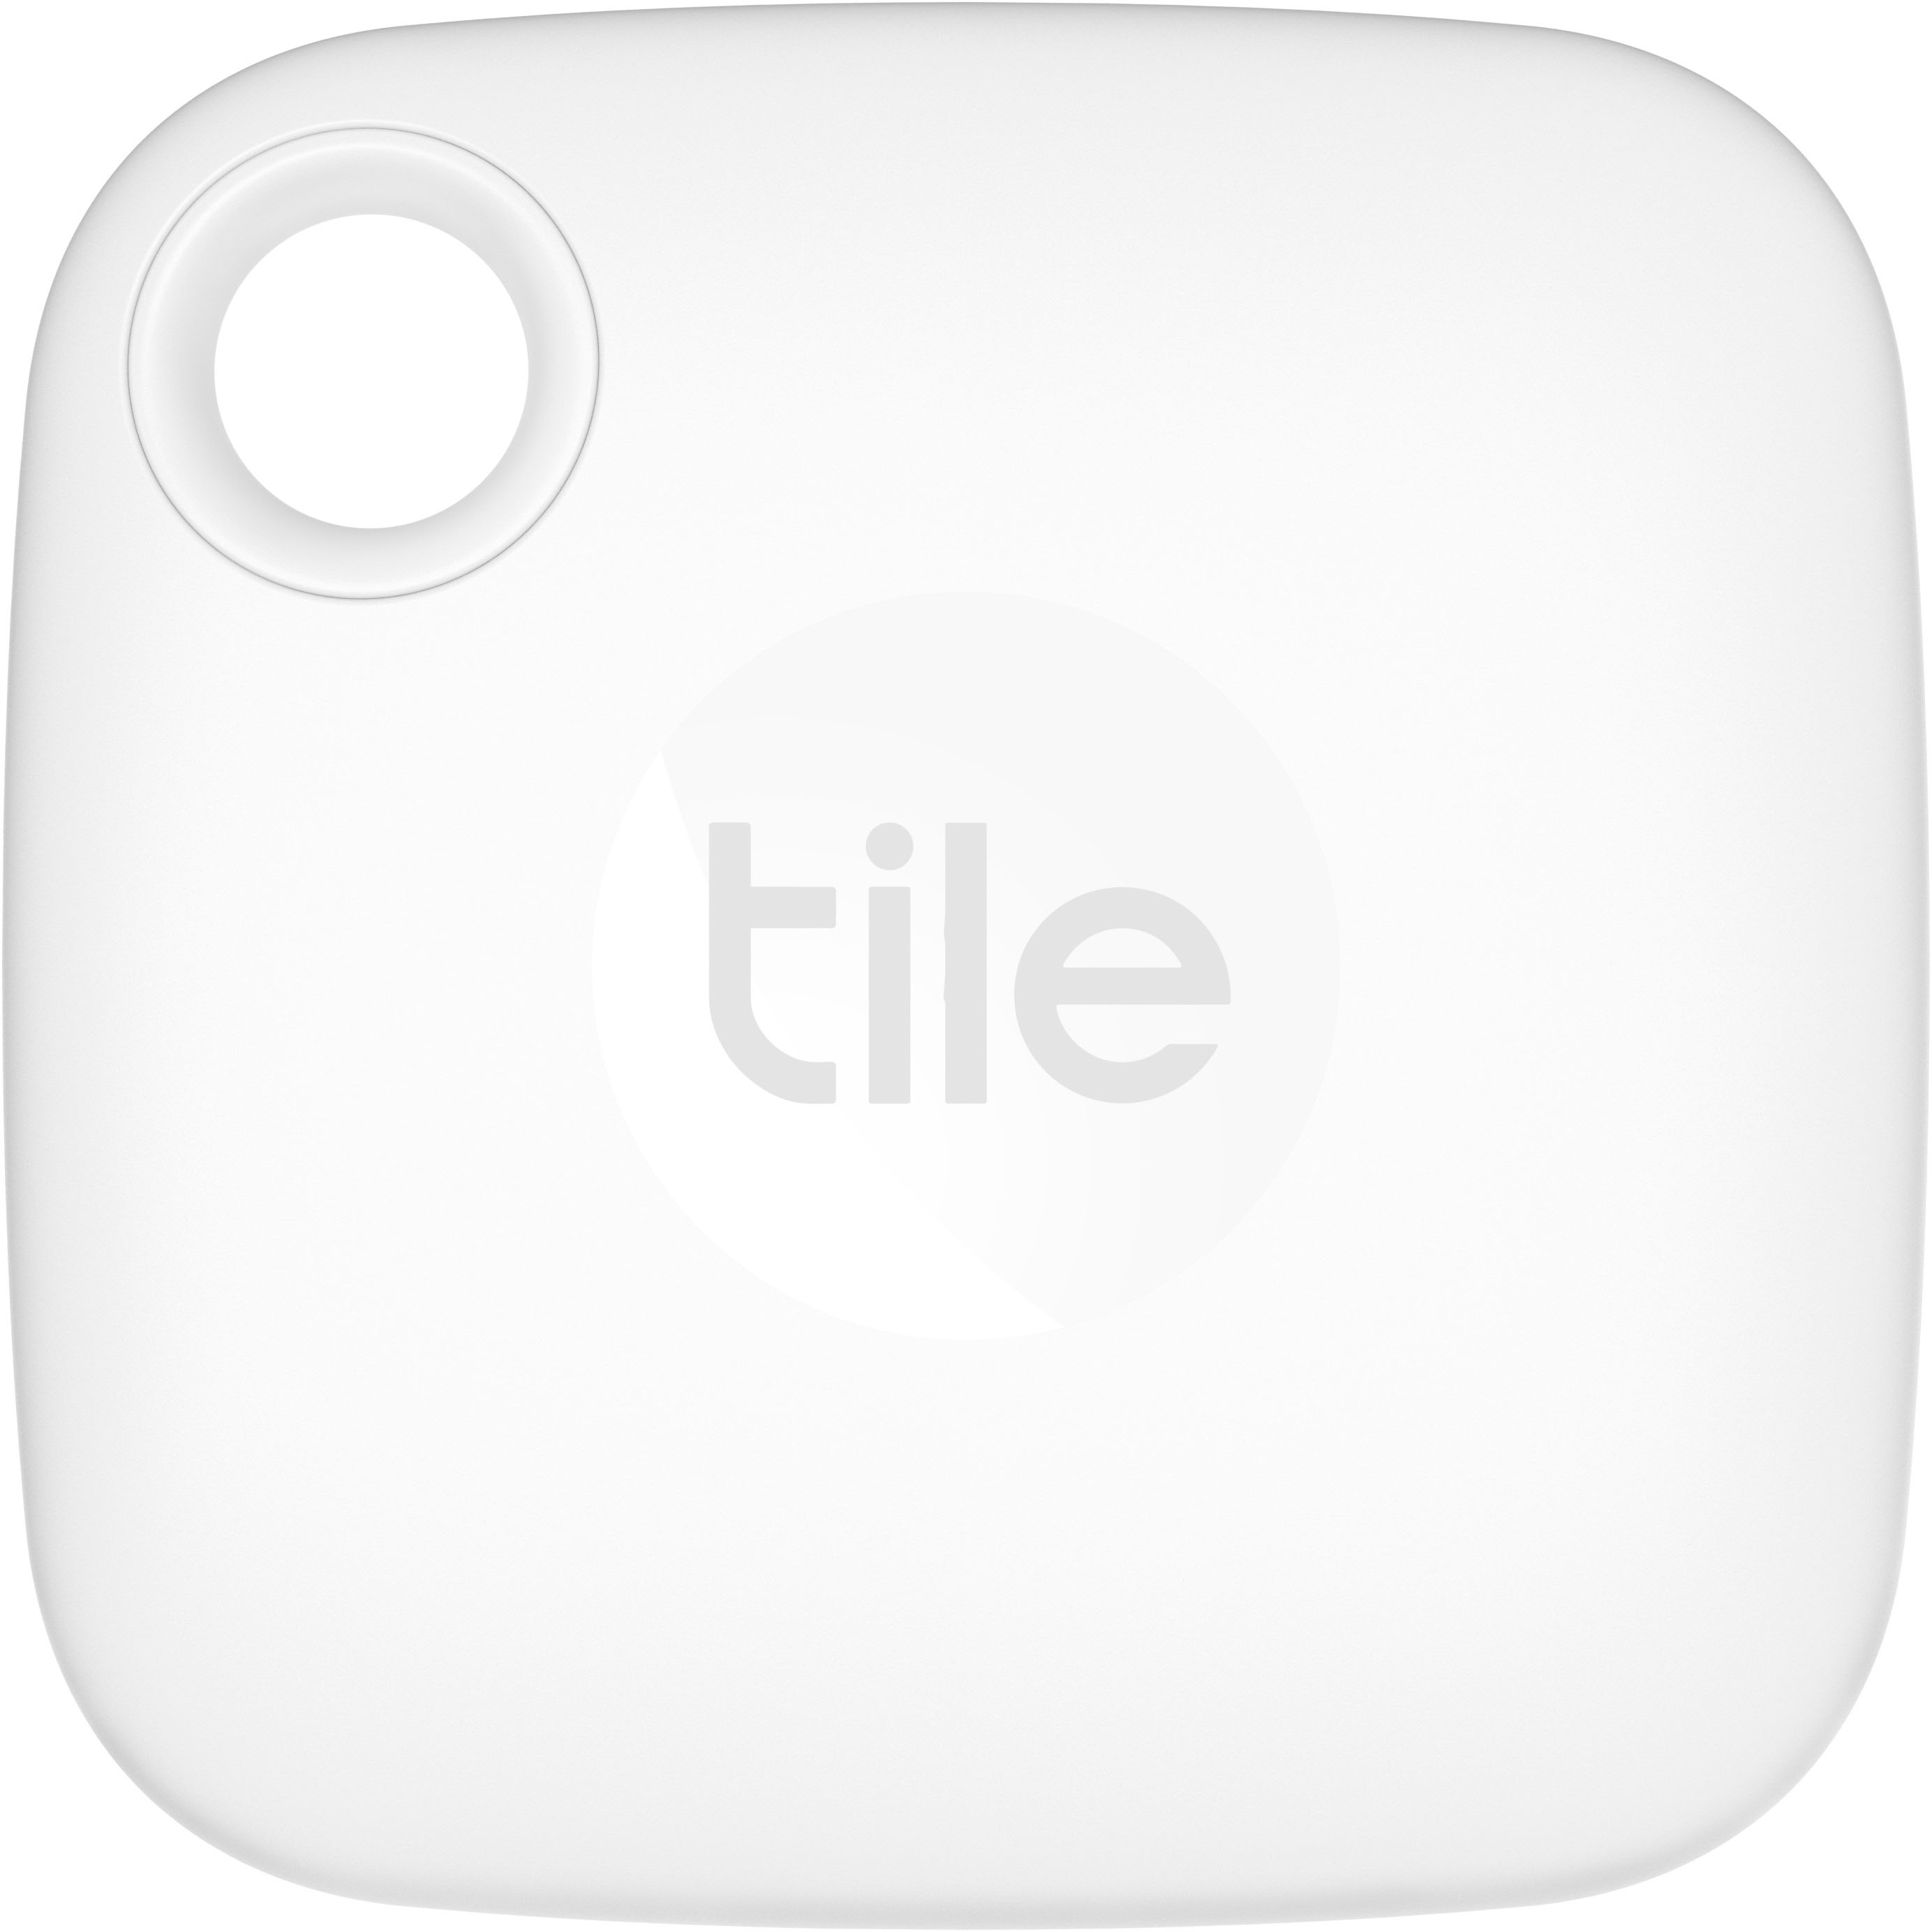 Review: Tile Sticker is a Great, Tiny, Adhesive Bluetooth Tracker